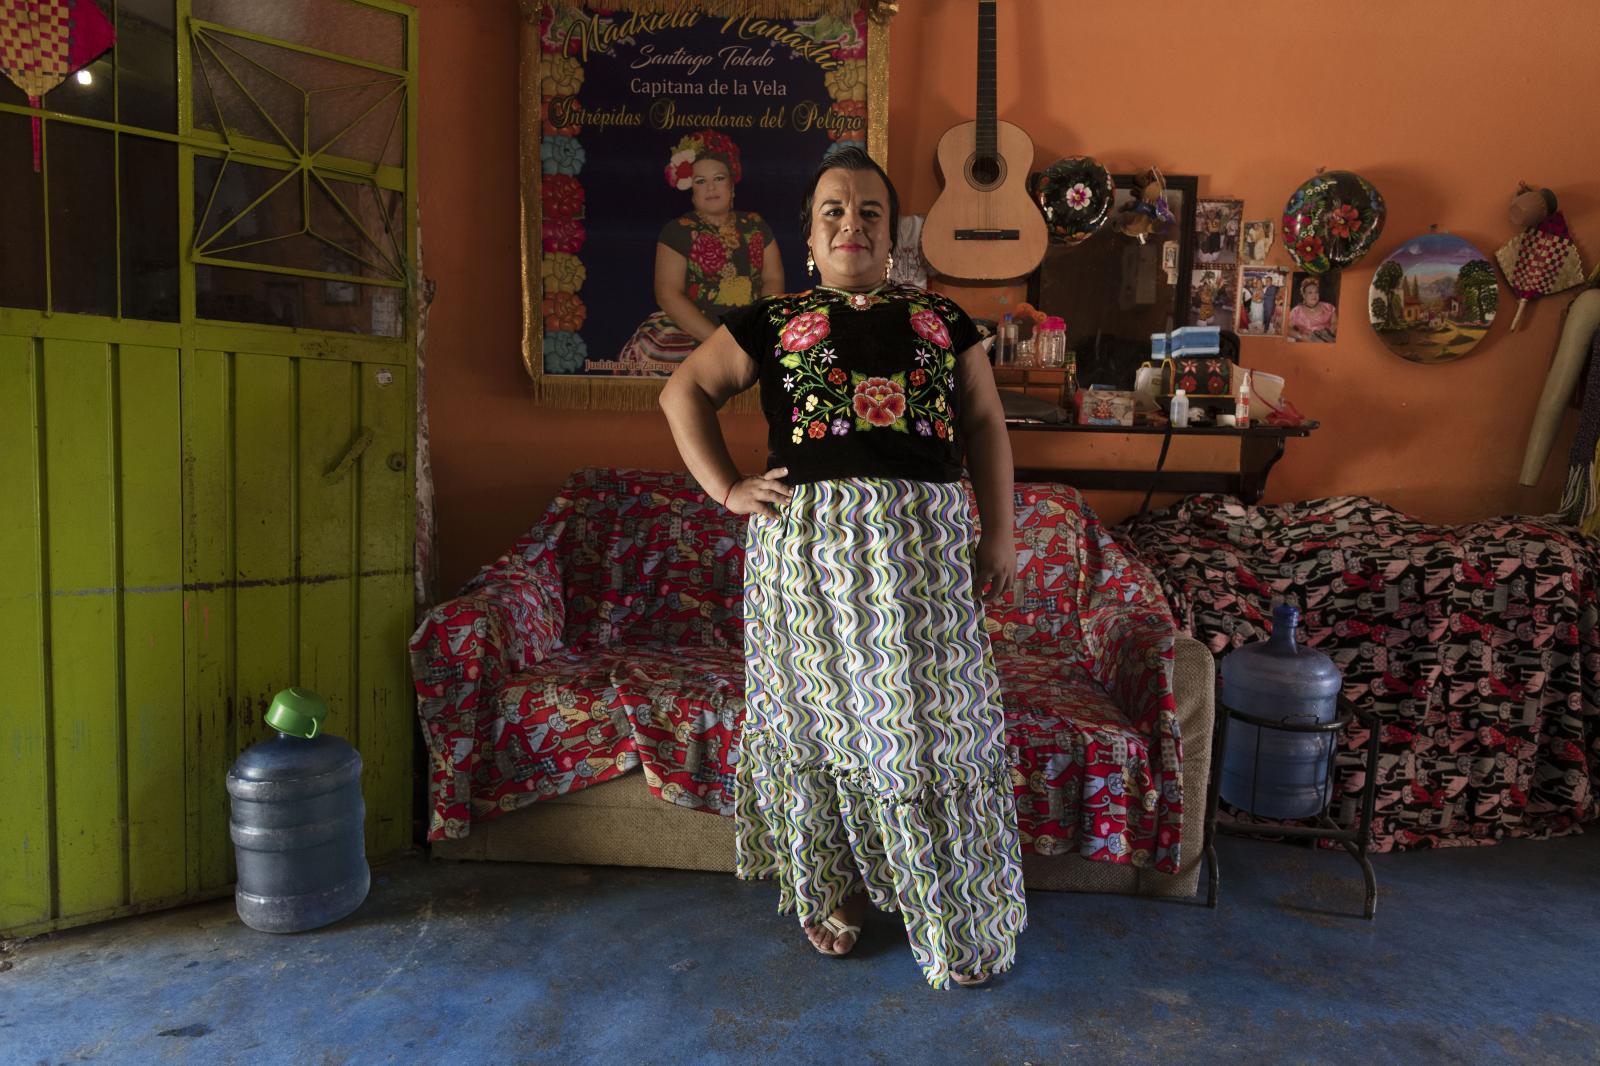 Muxes - The Third Gender in The Zapotec Land